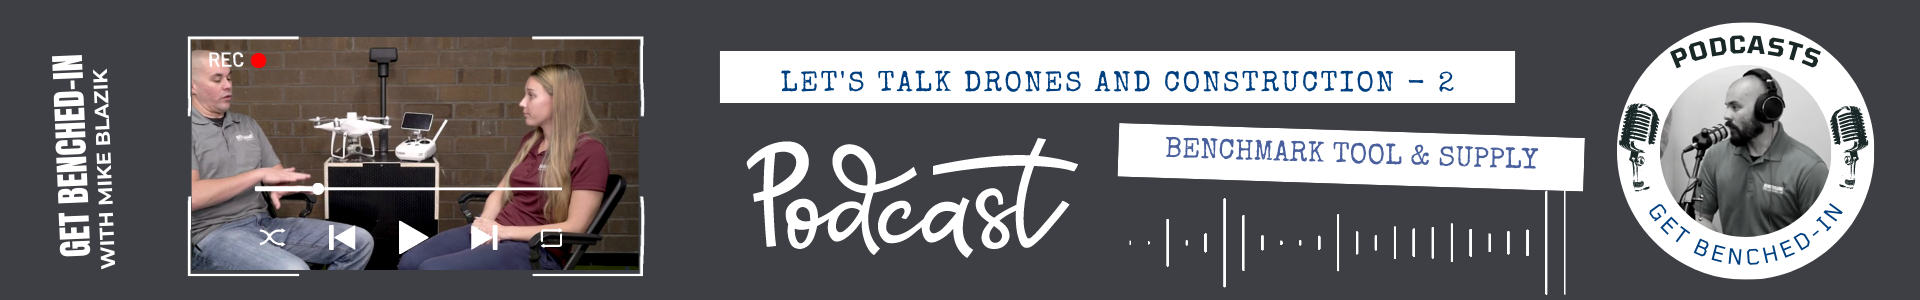 Let's Talk Drones and Construction - 2